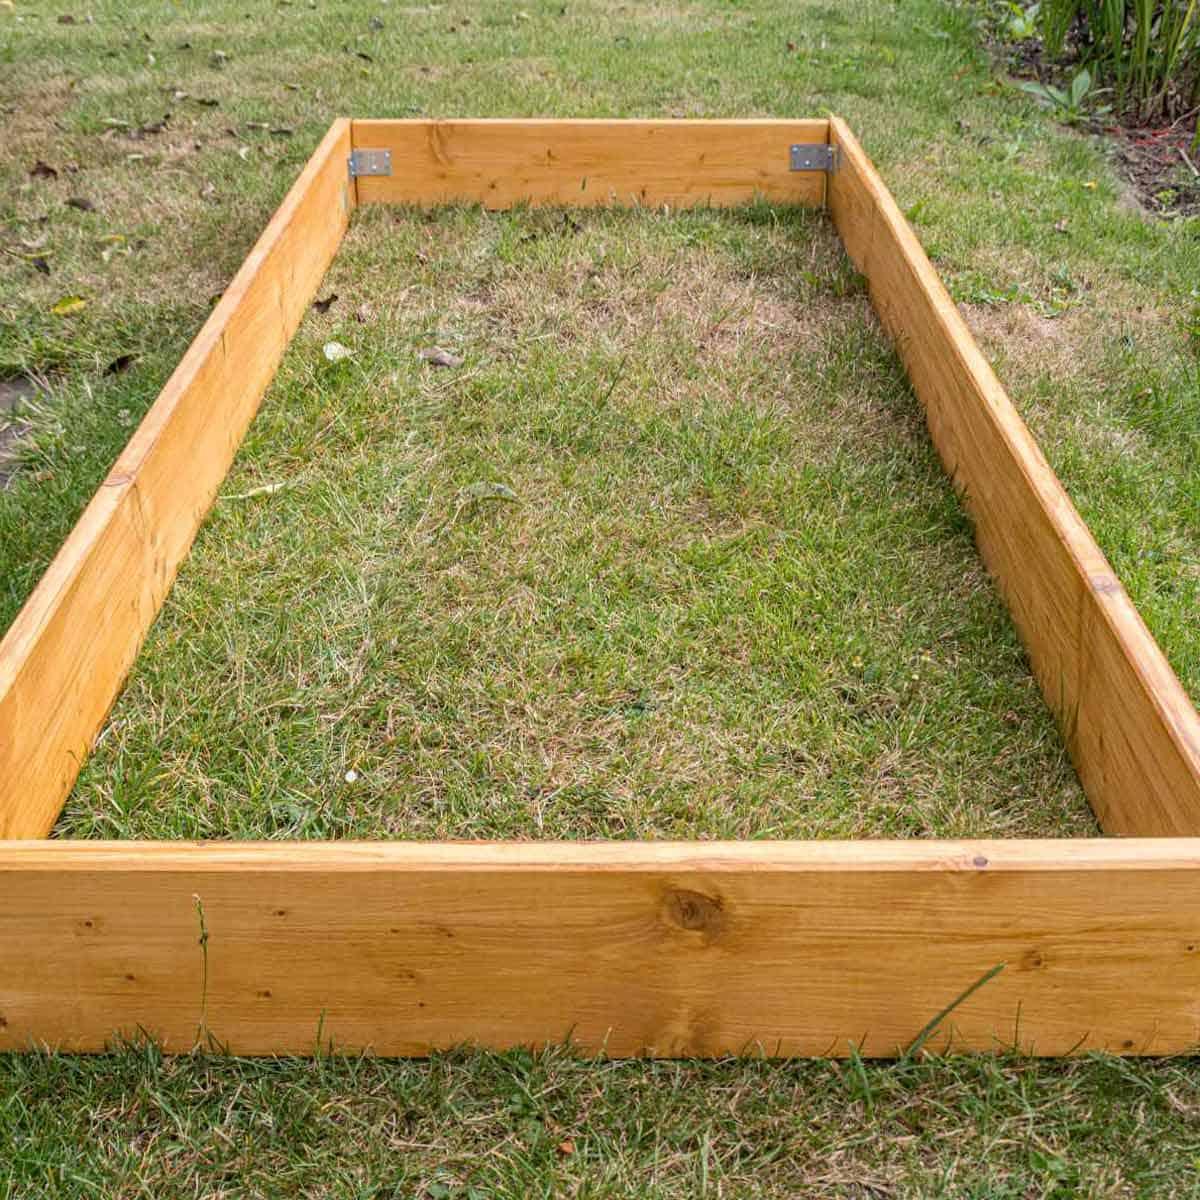 A raised garden bed that is not planted and is going fallow.